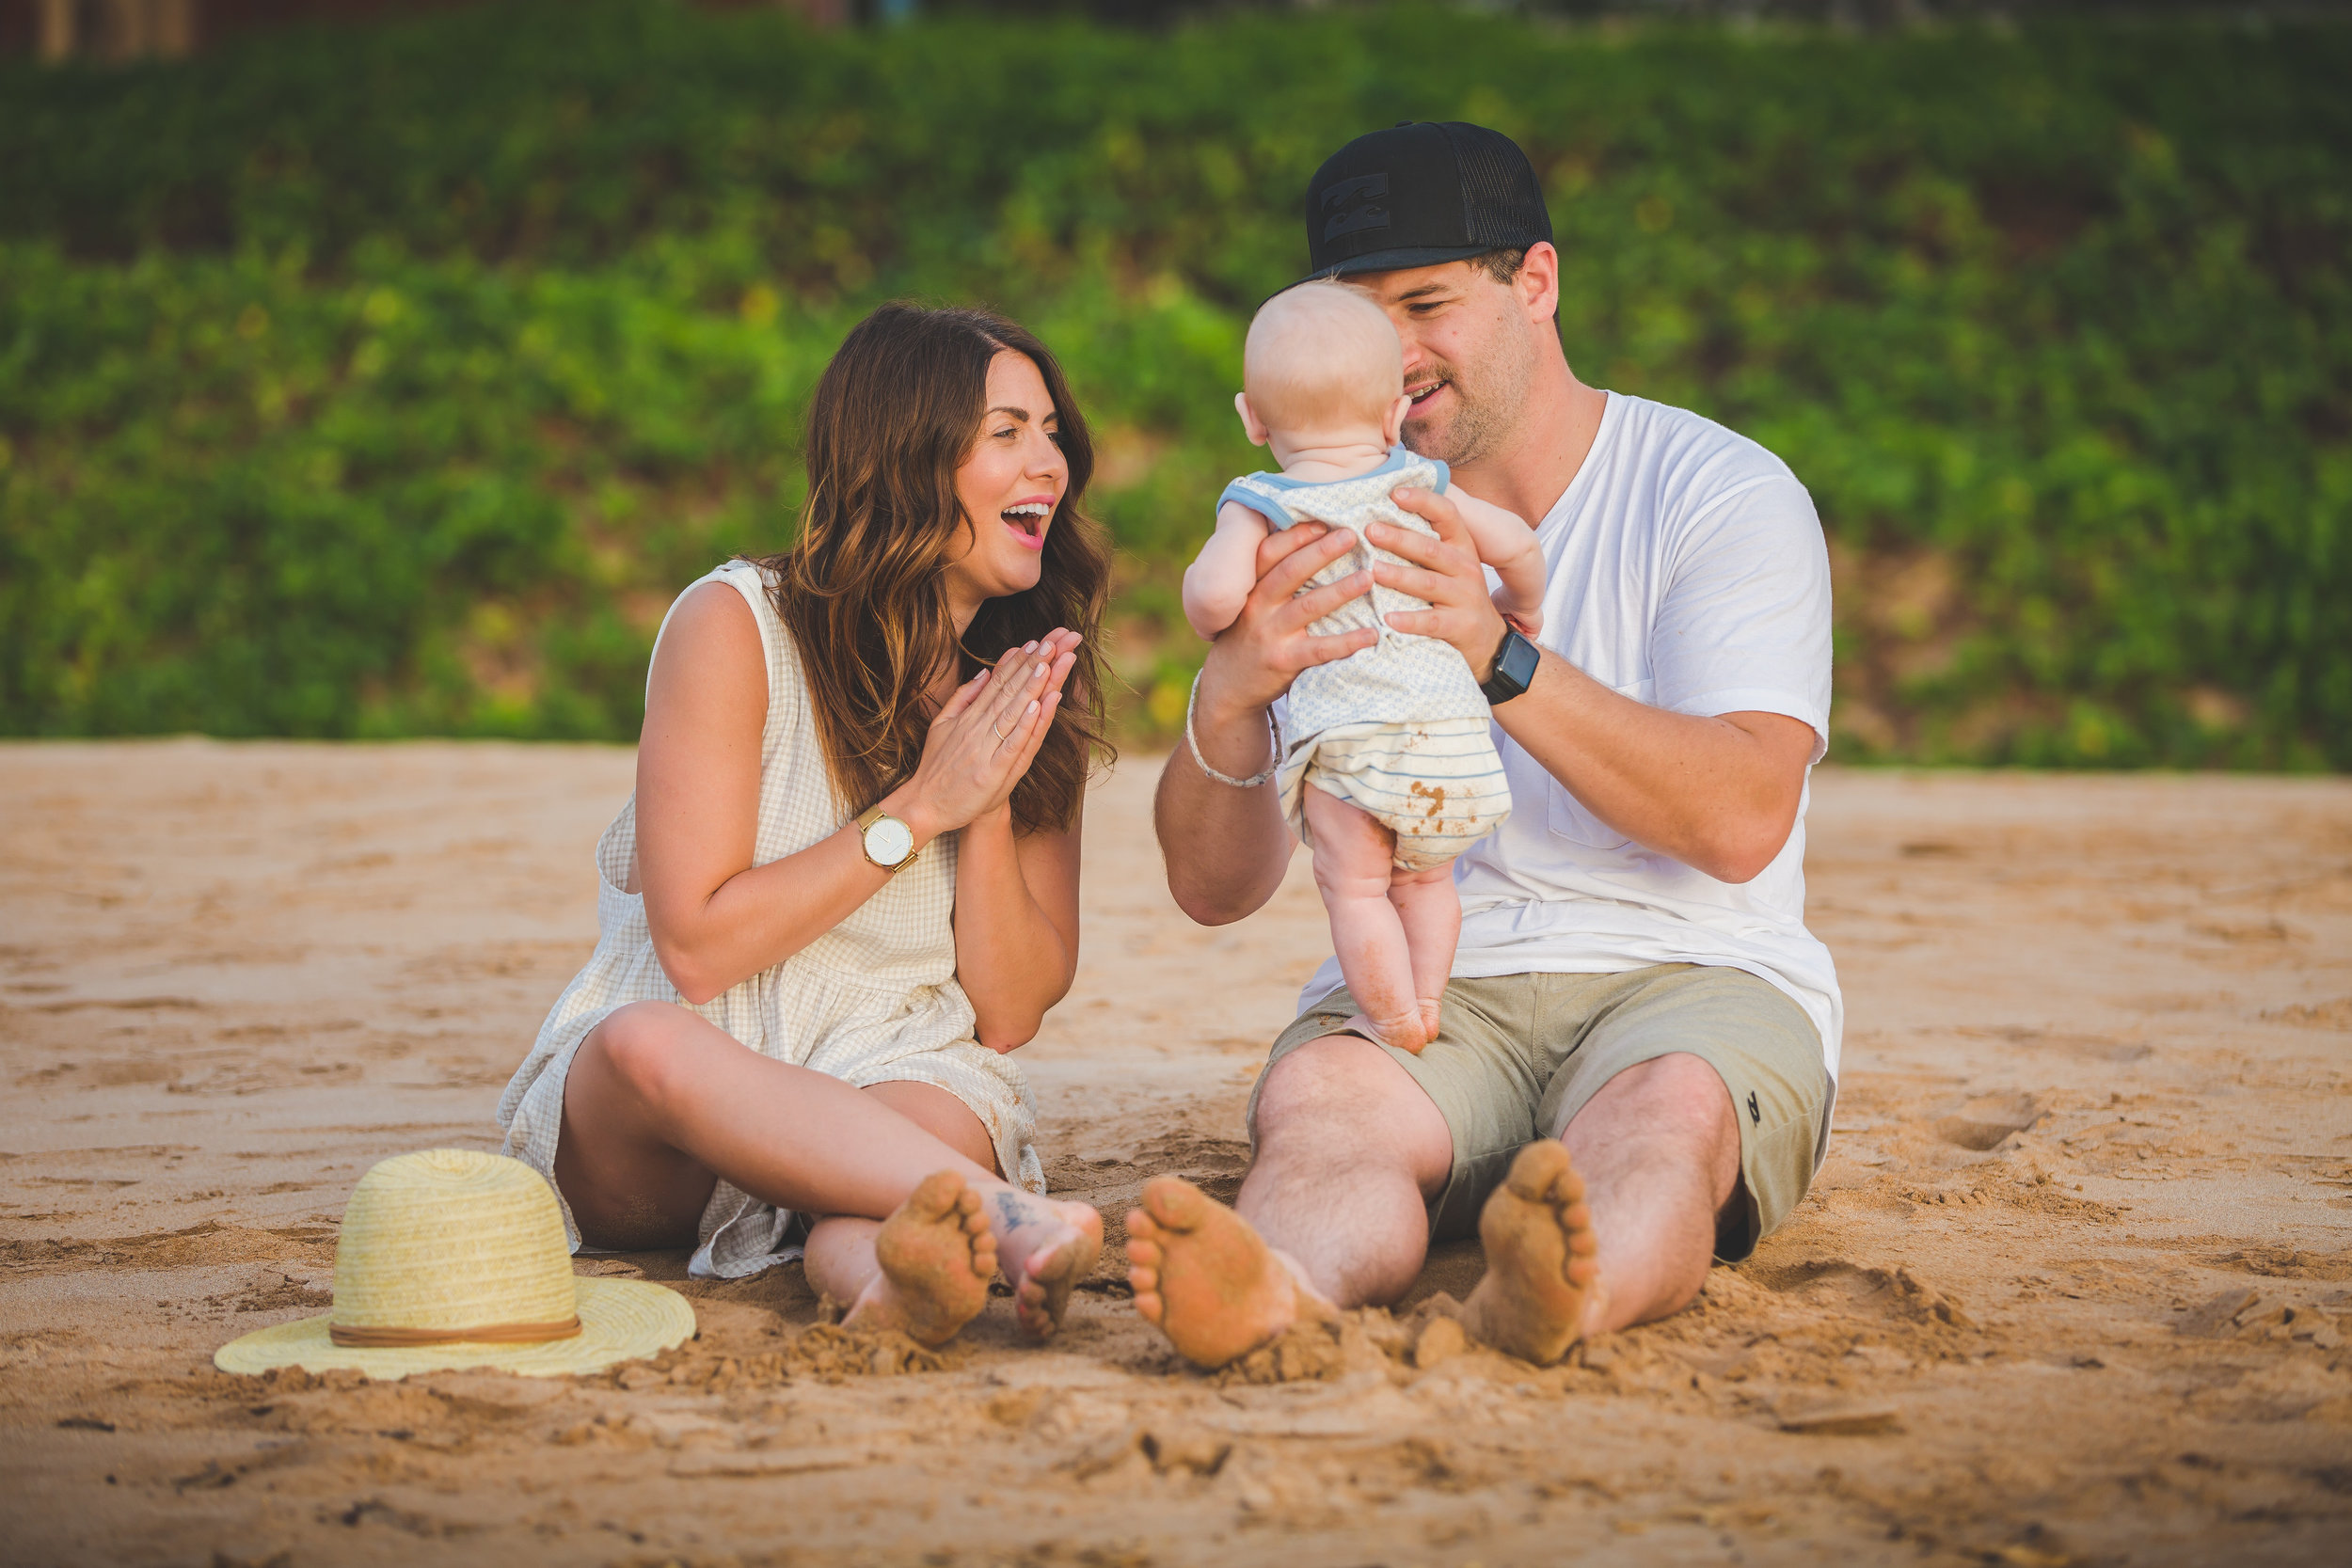 Jillian Harris Booked Flytographer in Maui and LOVED IT!